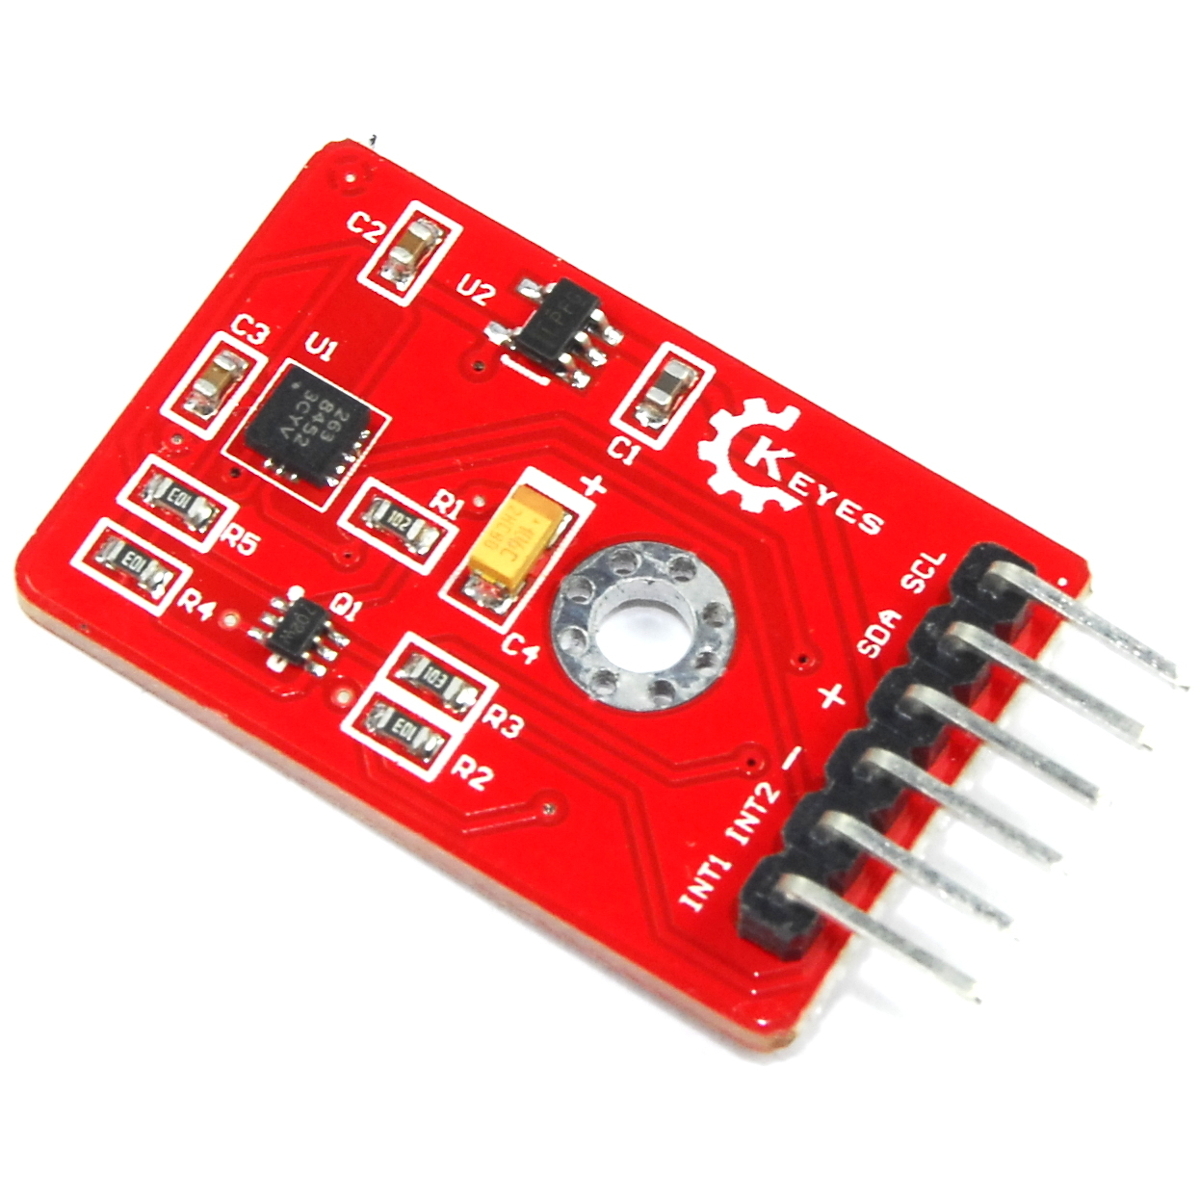 MMA8452Q 3 Axis Acceleration Module Keyes Red Image 1